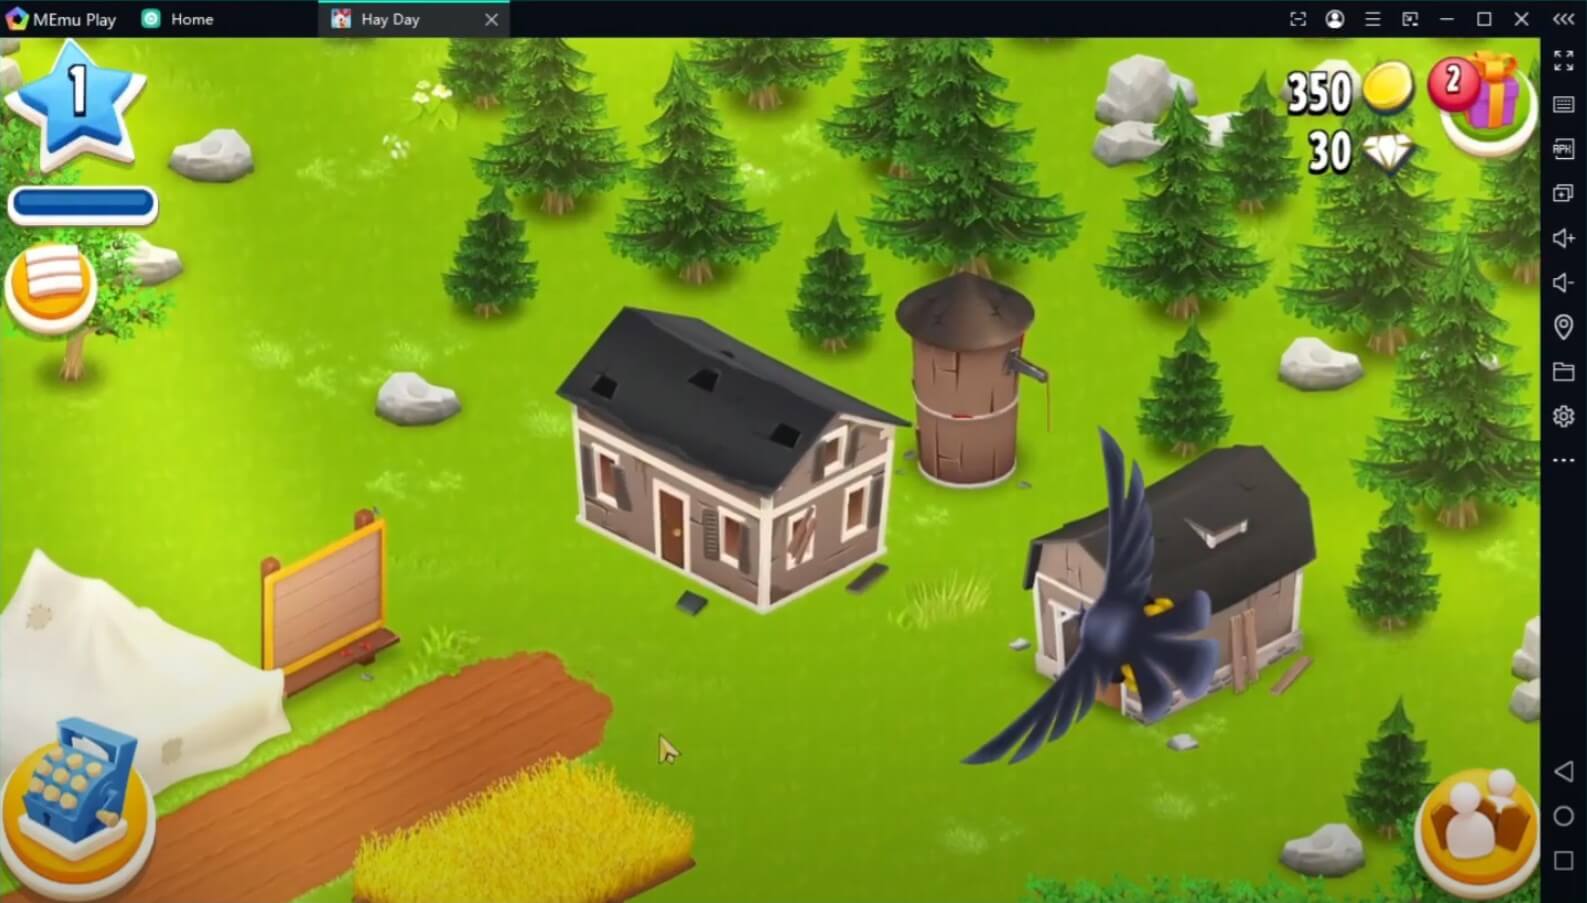 play hay day on pc with MEmu Android Emulator